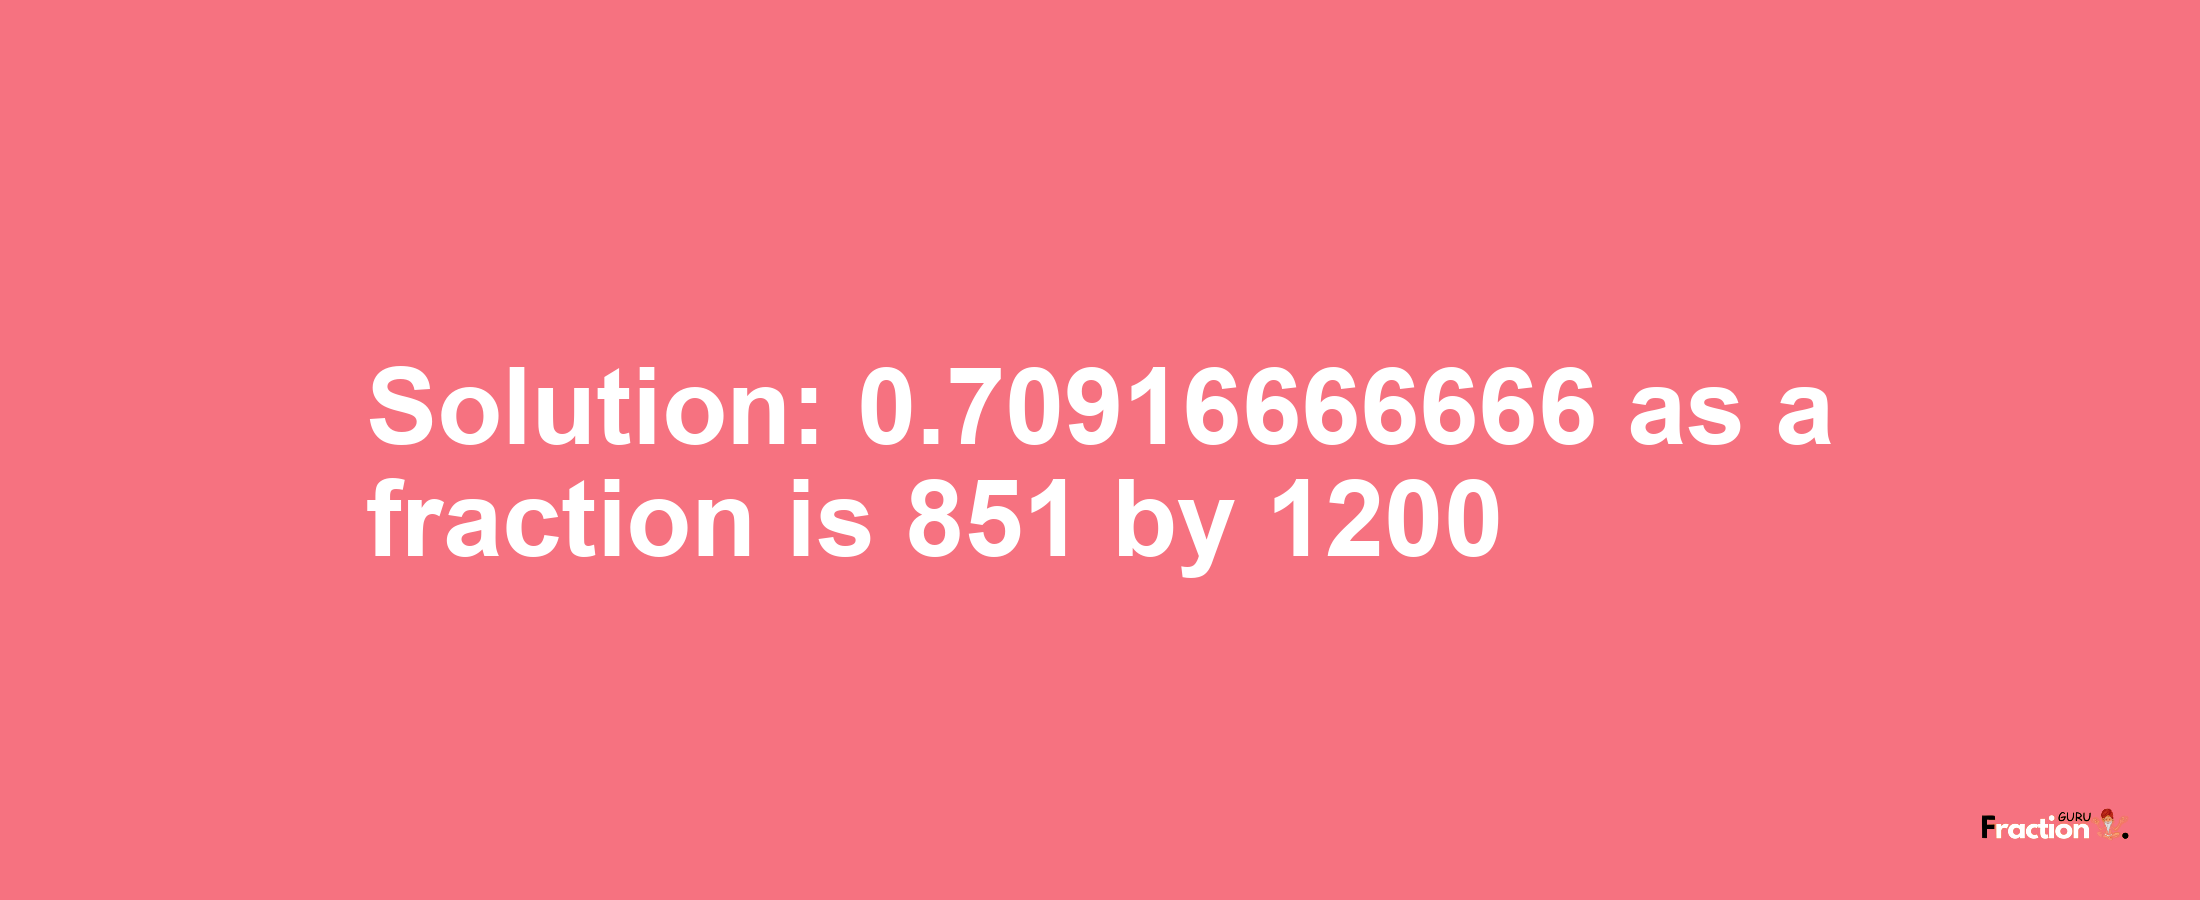 Solution:0.70916666666 as a fraction is 851/1200